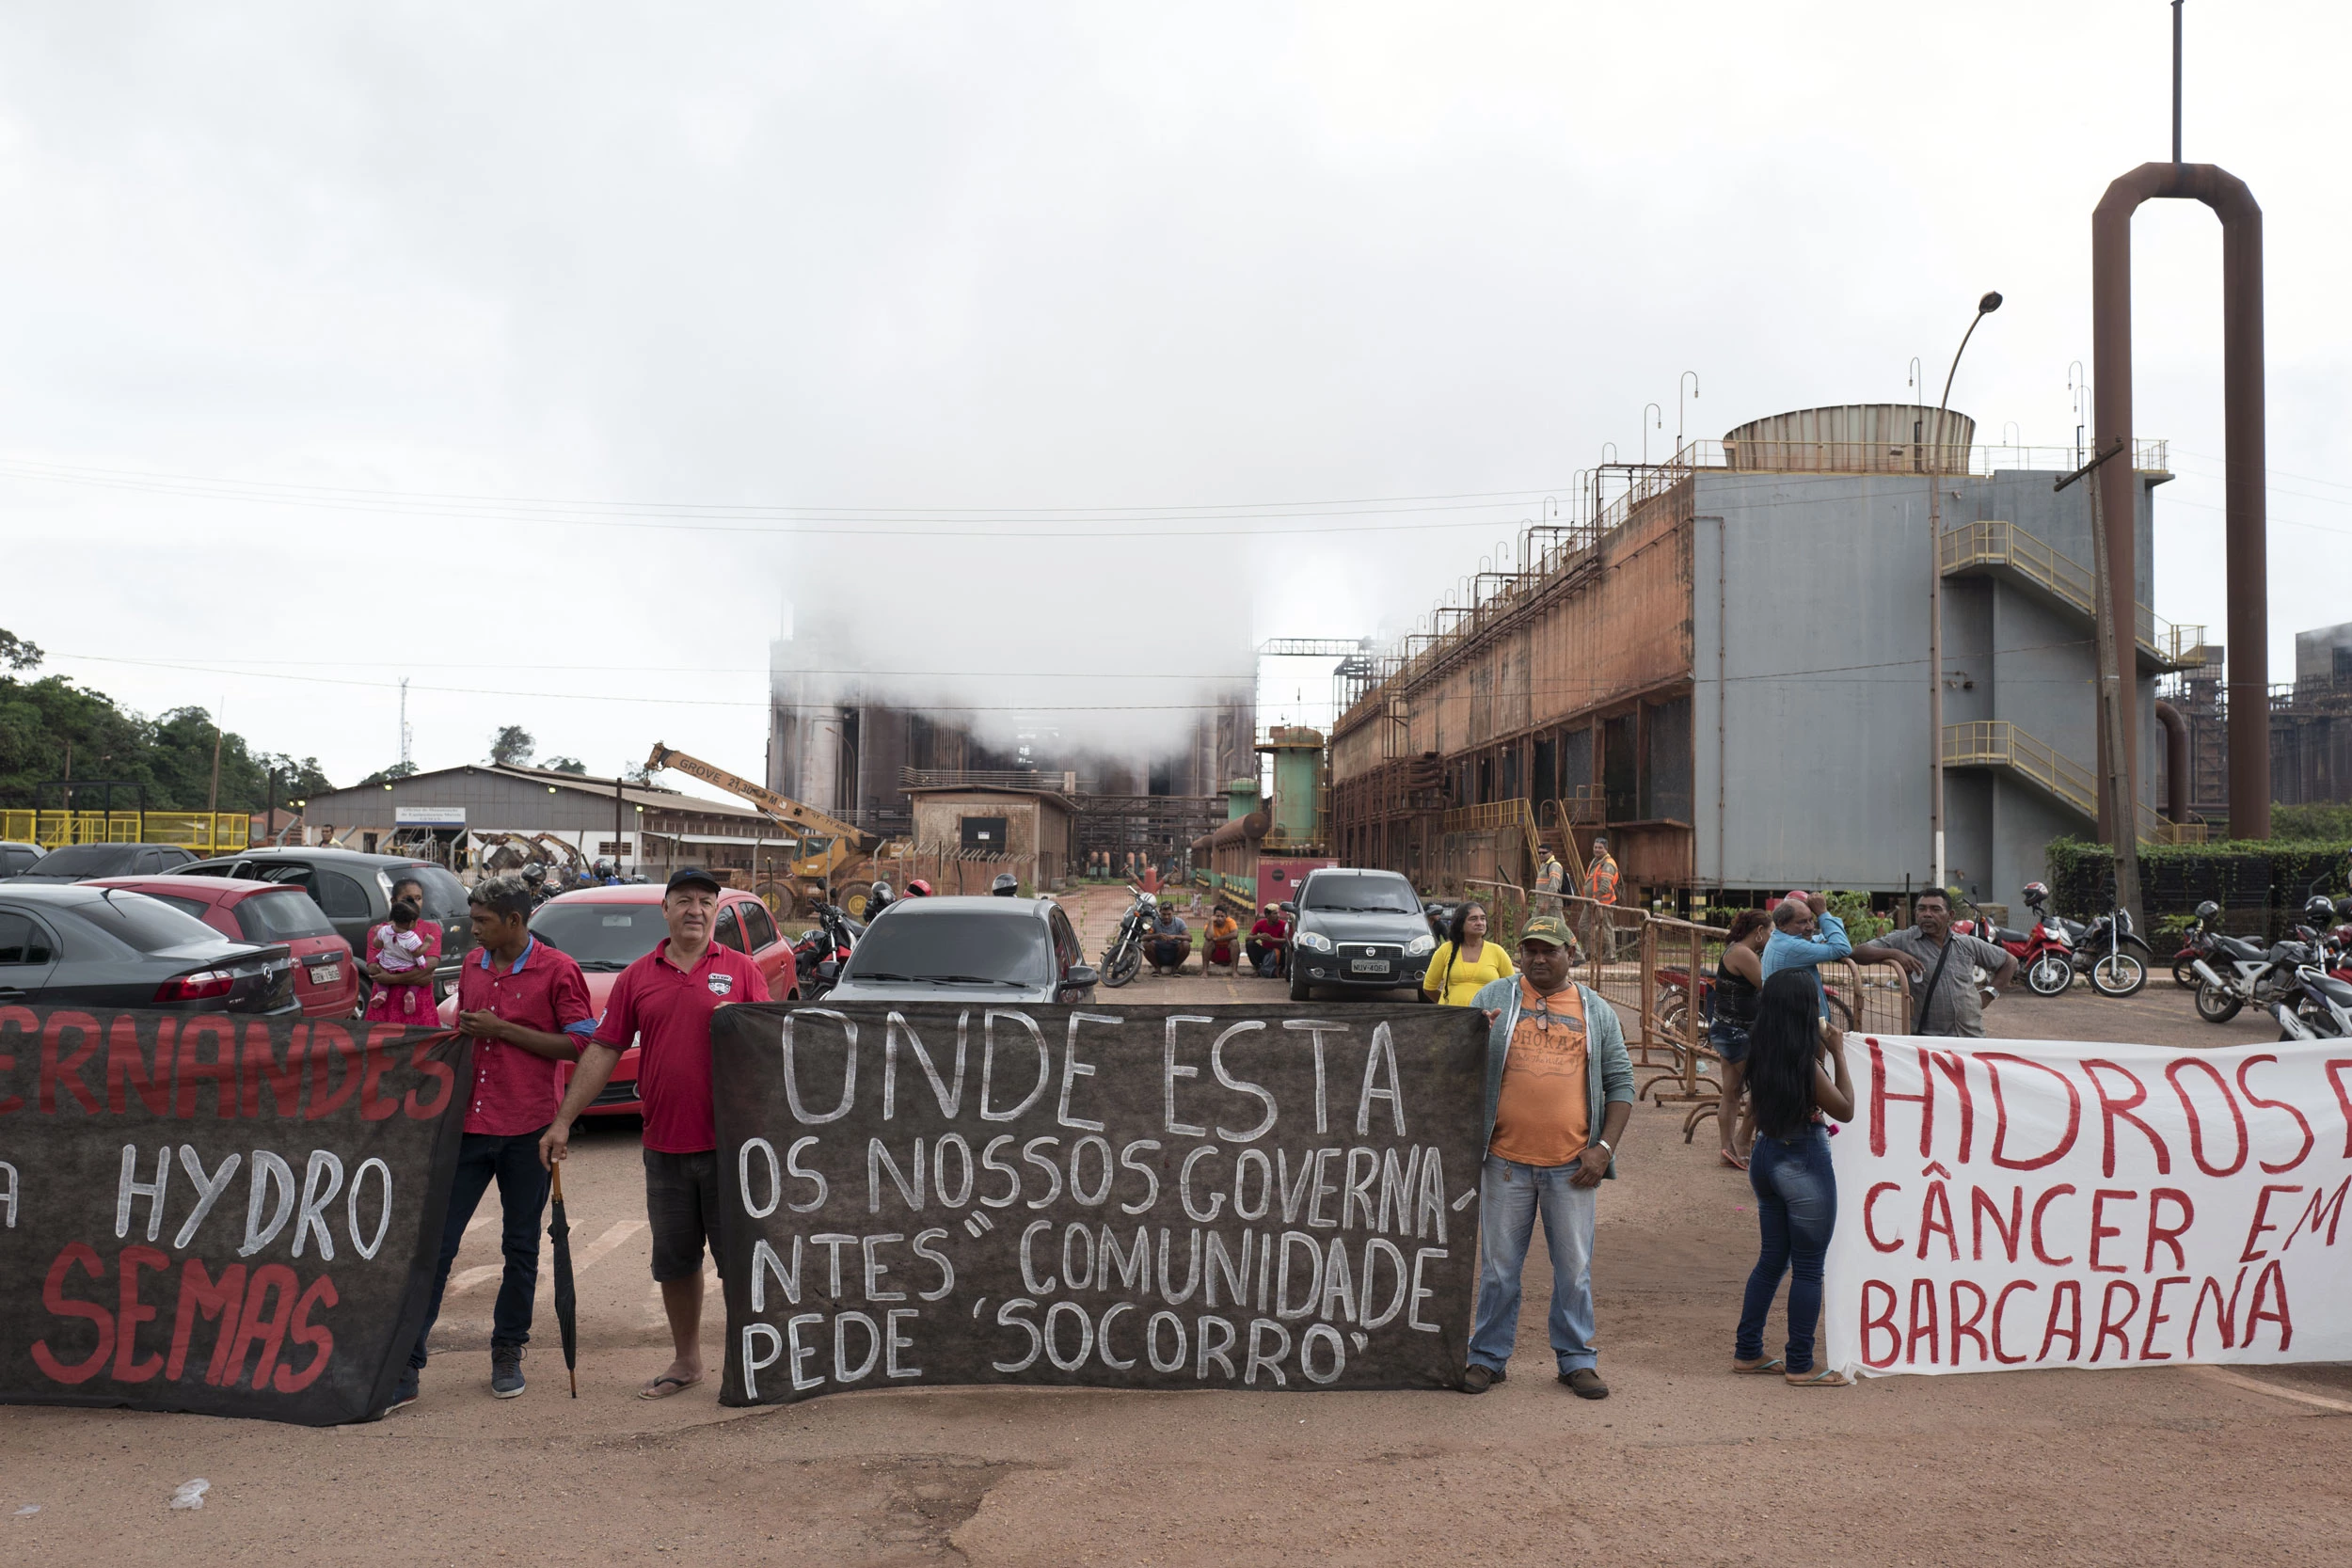 Demonstrators hold signs during a protest against Norsk Hydro ASA discharging untreated water into a nearby river in front of the company's alumina refinery in Barcarena, Para state, Brazil, on Wednesday, Feb. 28, 2018. A Brazilian judge ordered Norsk Hydro ASA to pay for residents to be tested for health problems related to possible contamination caused by leakage from the company's Amazonian alumina operations, court documents show. Photographer: Alessandro Falco/Bloomberg via Getty Images